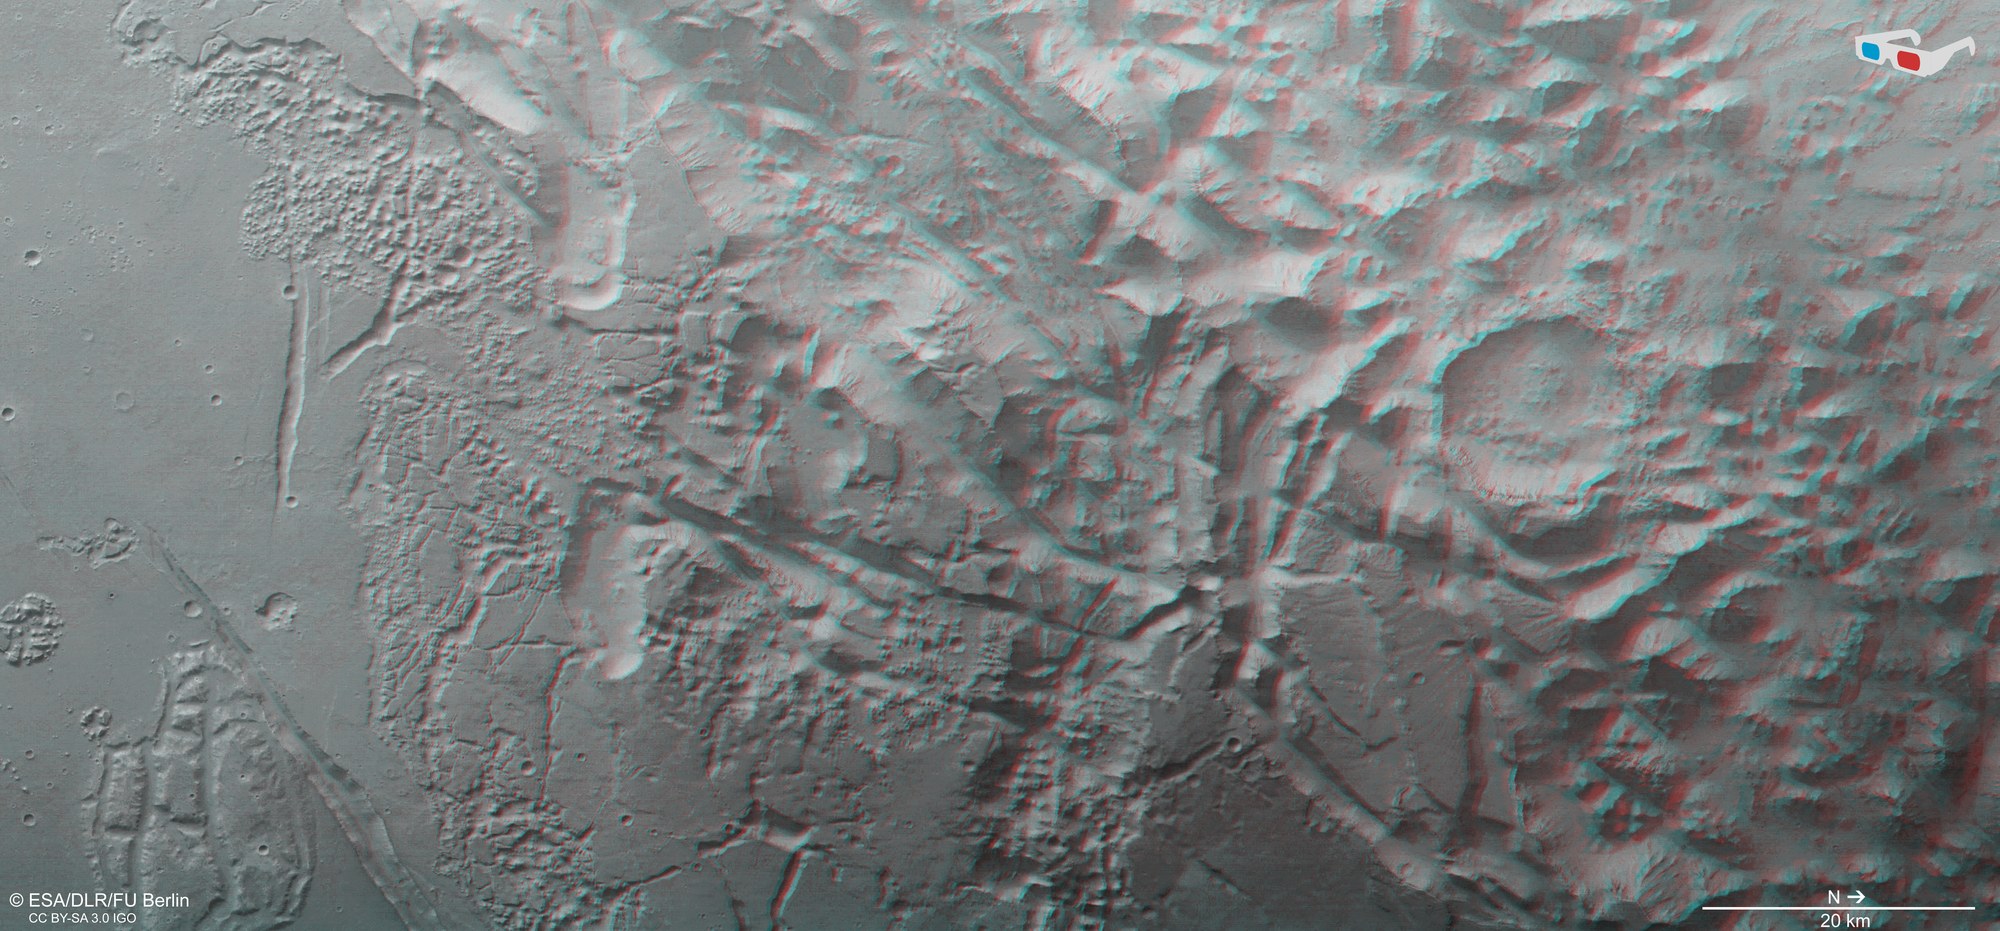 3D view of the transition zone between Margaritifer Terra and Aurorae Chaos